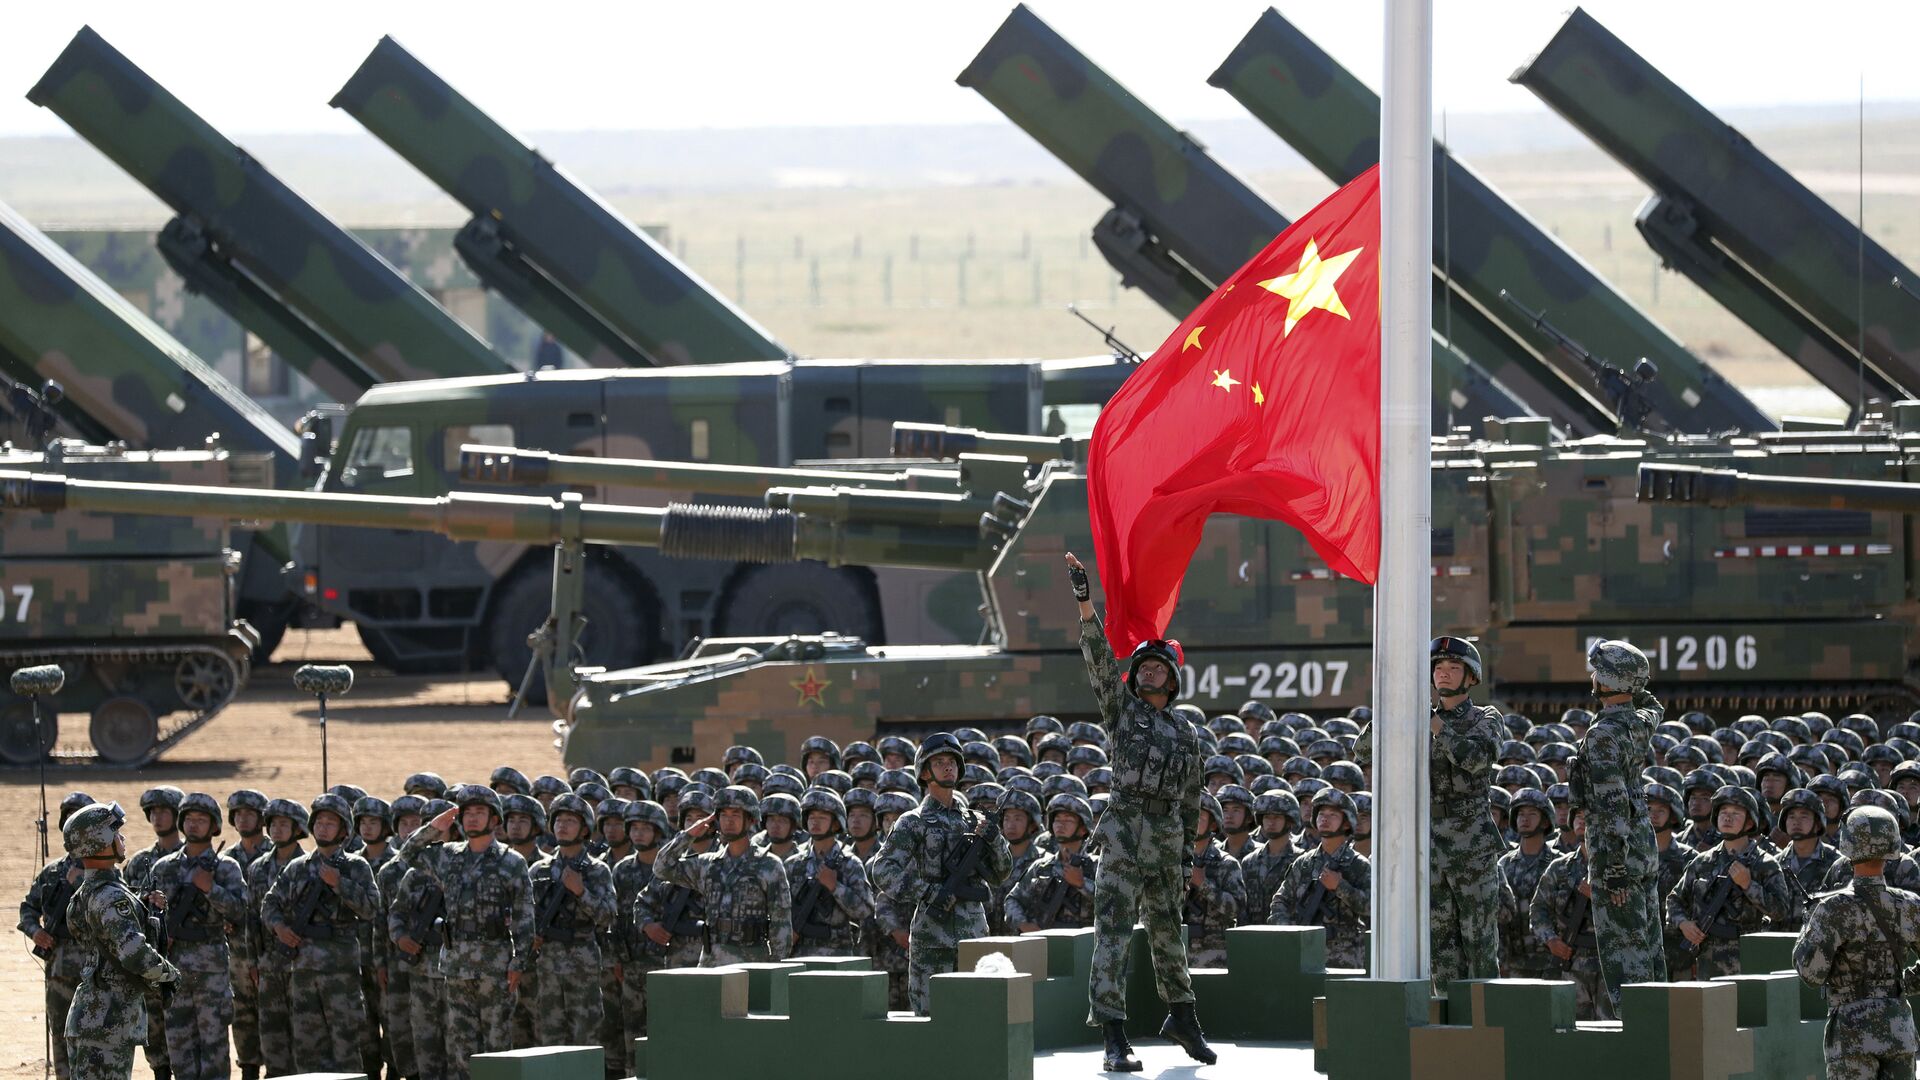 In this photo released by China's Xinhua News Agency, Chinese People's Liberation Army (PLA) troops perform a flag raising ceremony Sunday, July 30, 2017 for a military parade to commemorate the 90th anniversary of the founding of the PLA on Aug. 1 at Zhurihe training base in north China's Inner Mongolia Autonomous Region - Sputnik International, 1920, 29.07.2022